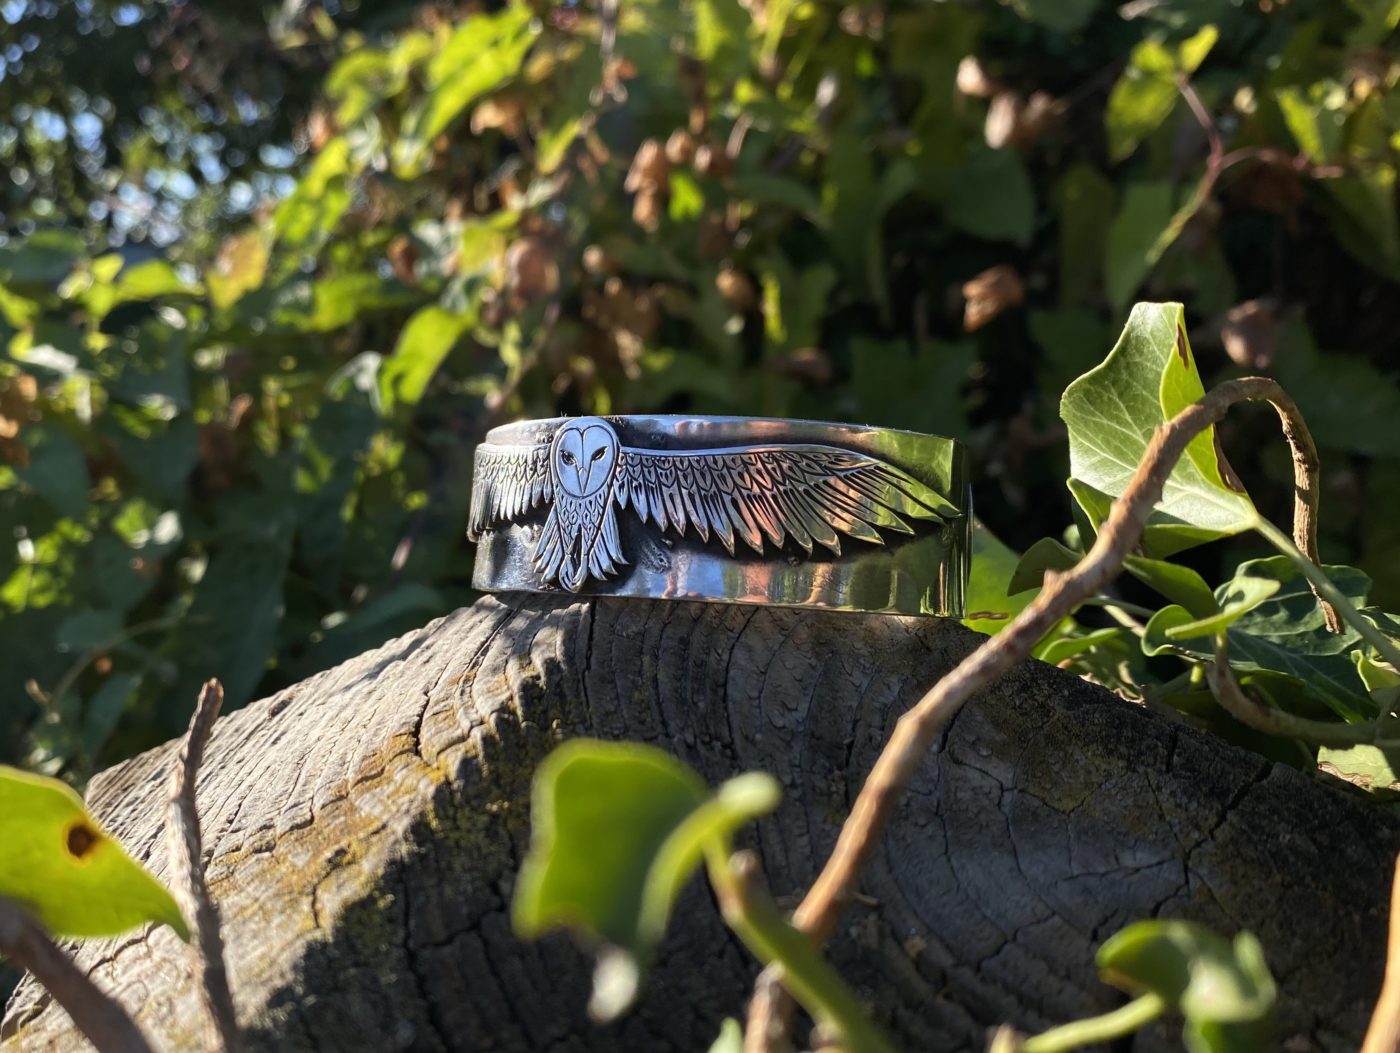 solid silver owl bangle bracelet kuff handmade in England using recycled, upcycled, repurposed silver and green ethical techniques